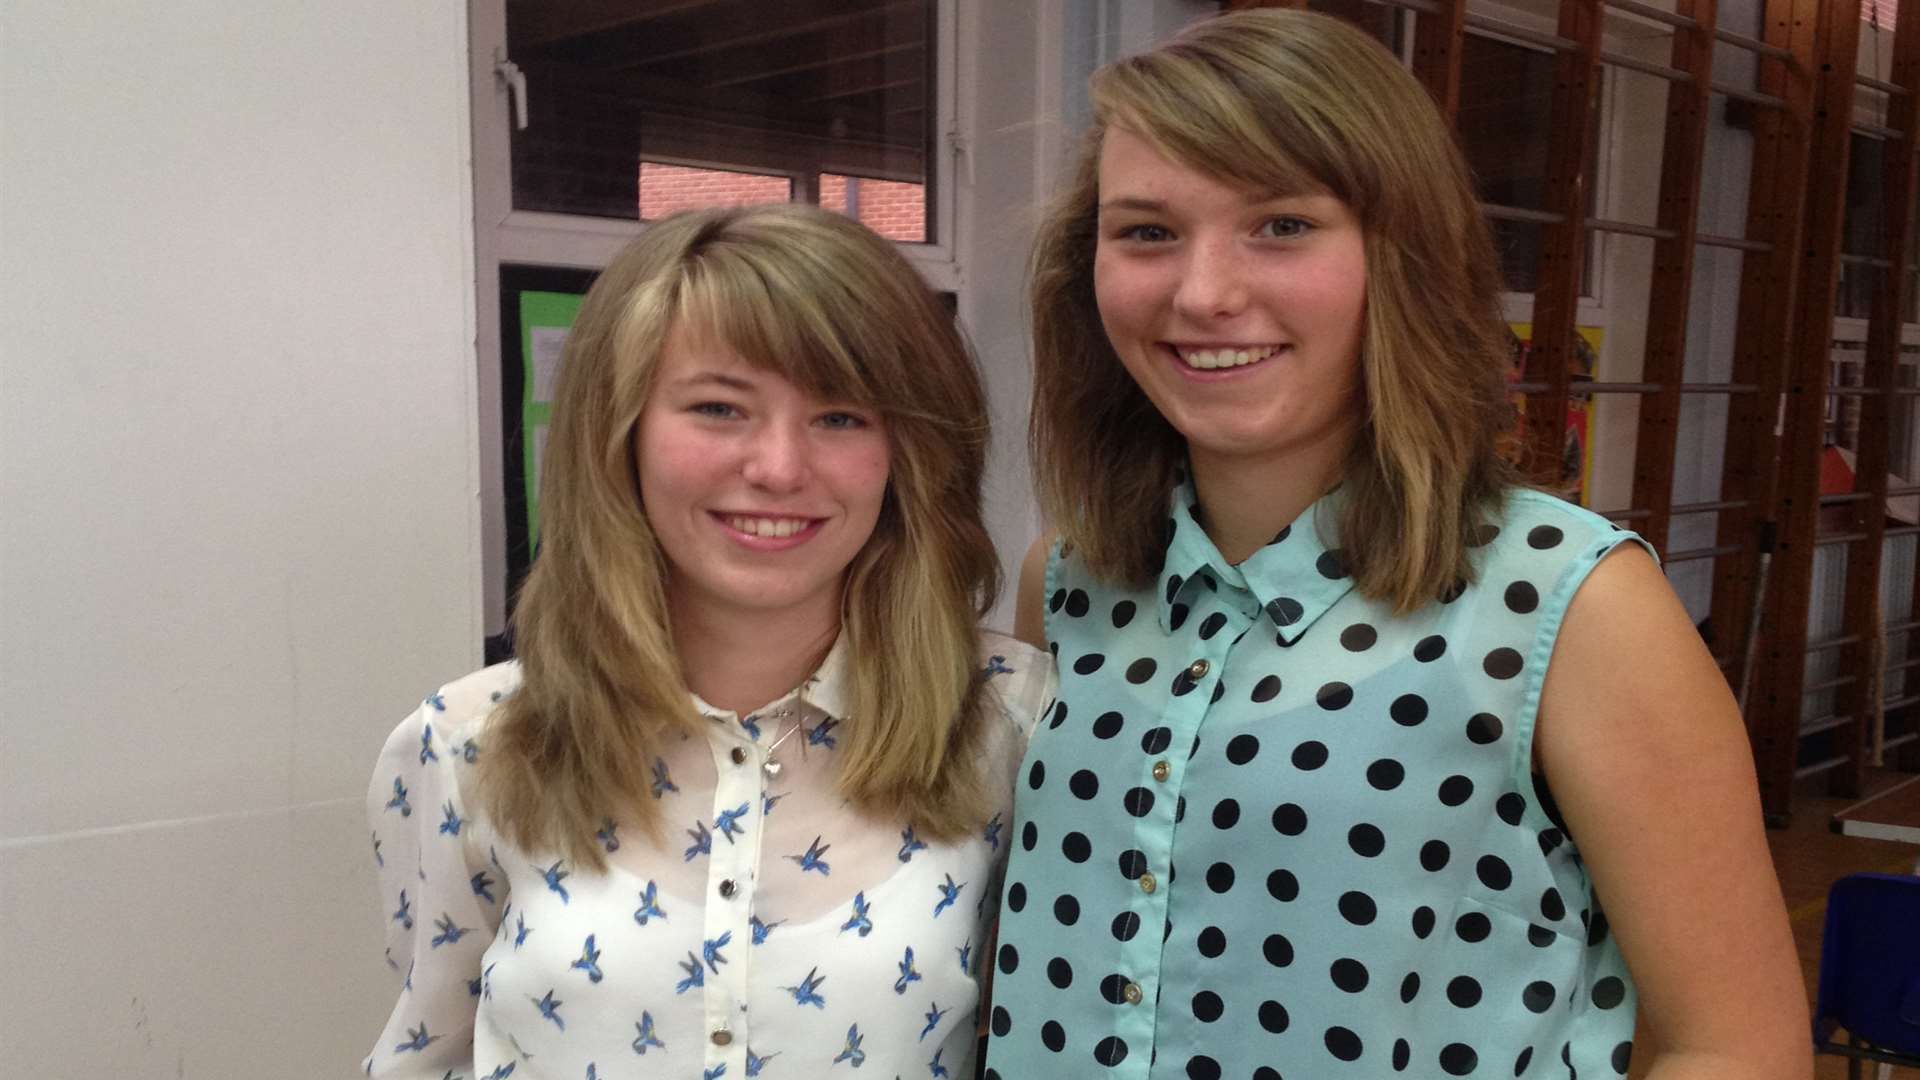 Twins Shona and Holly Callaghan, 16, from Sittingbourne, had a double reason to celebrate their very good results.